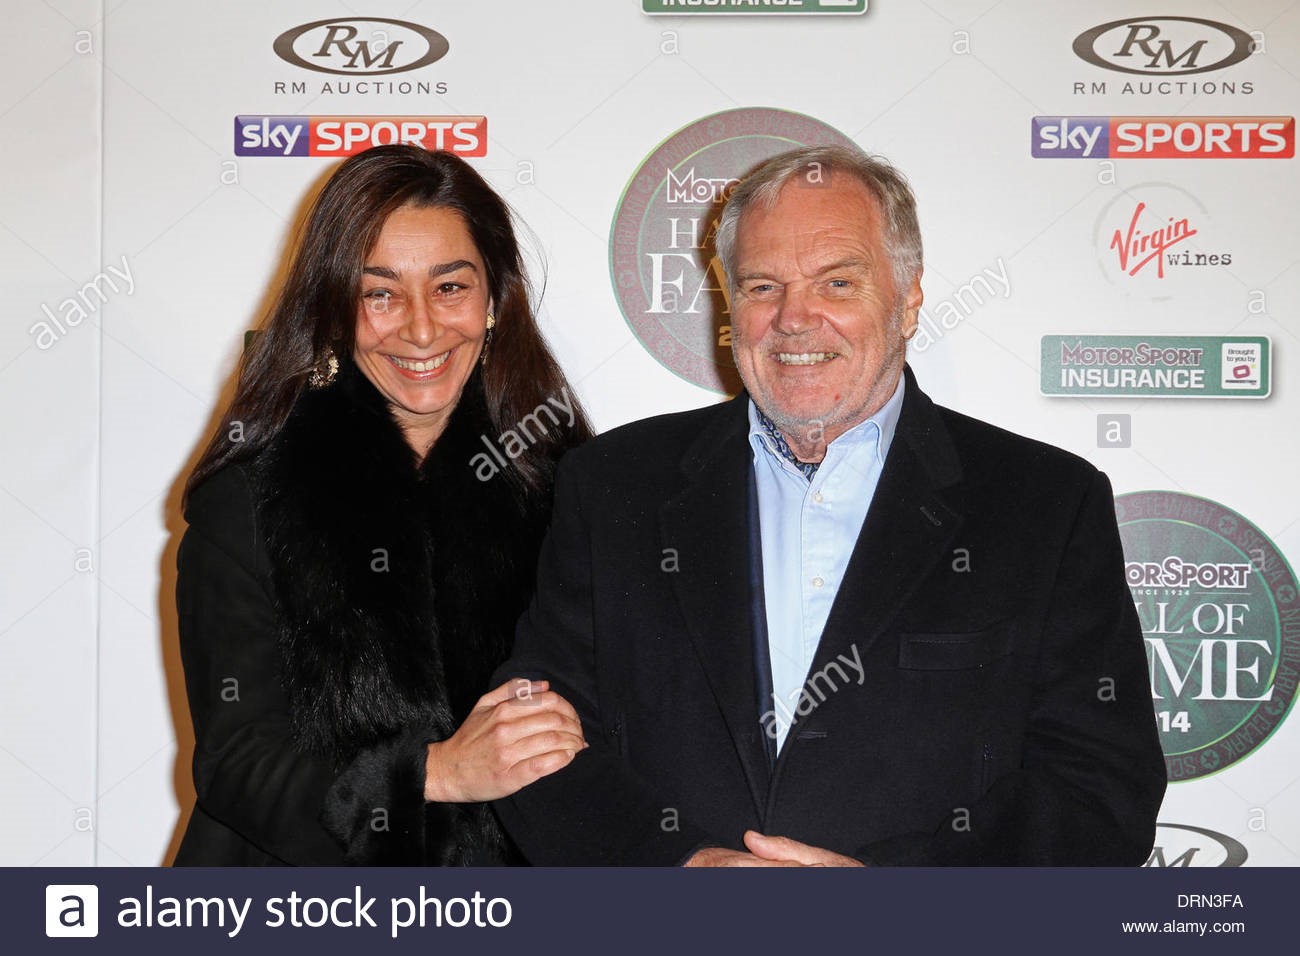 London, UK. 29th January 2014. Patrick Head and his wife attend the Hall of Fame 2014 charity auction. 